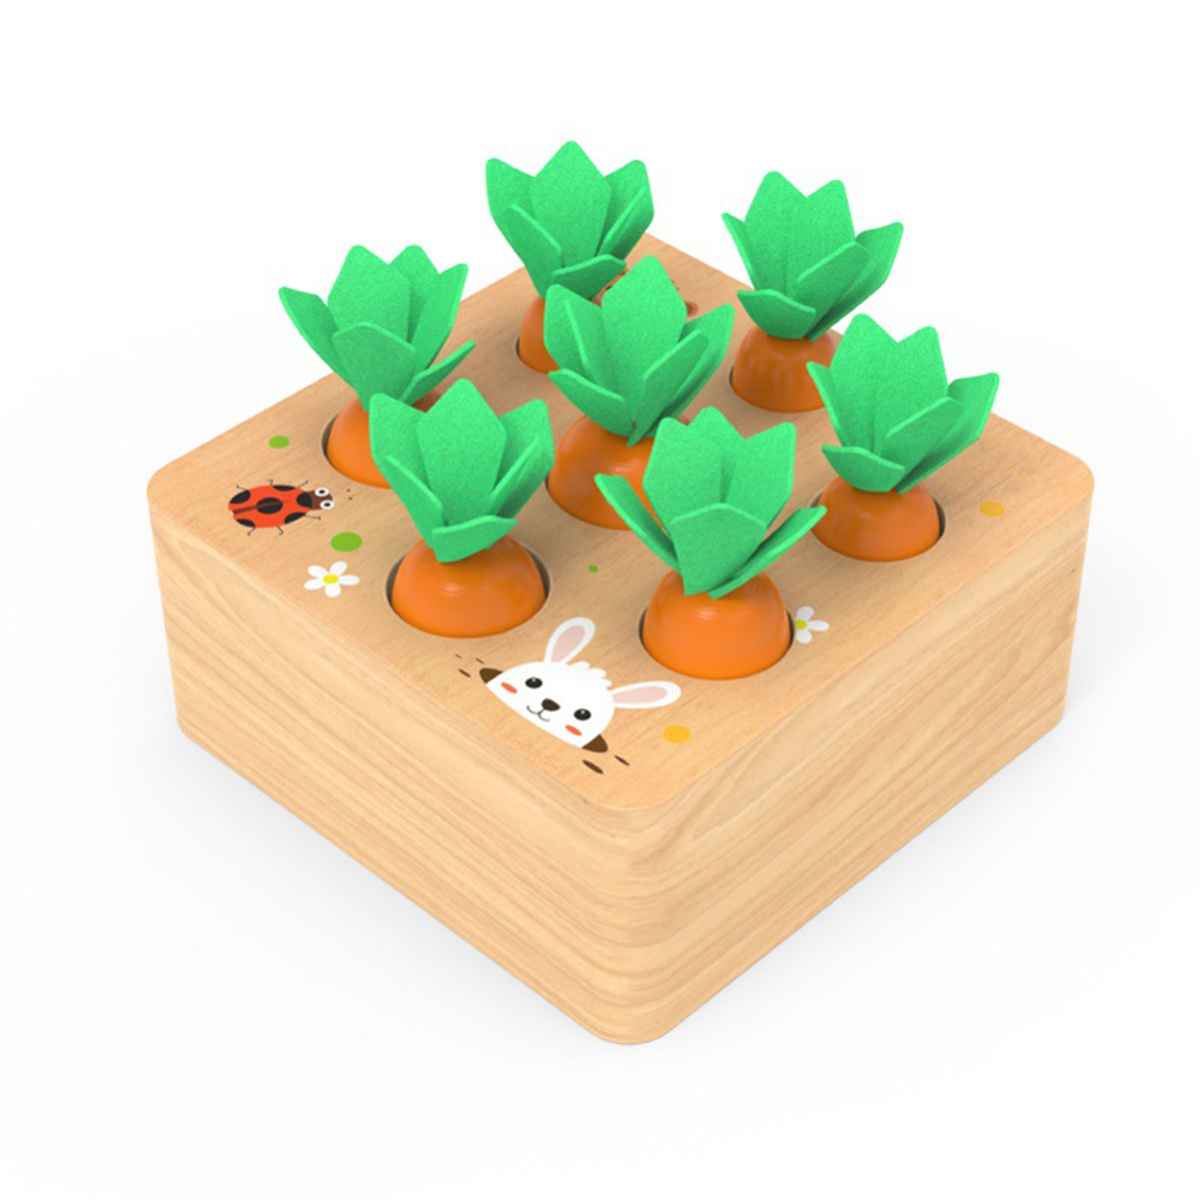 Kids-Wooden-Building-Blocks-Pulling-Carrot-Game-Children-Early-Educational-Toys-1676982-5